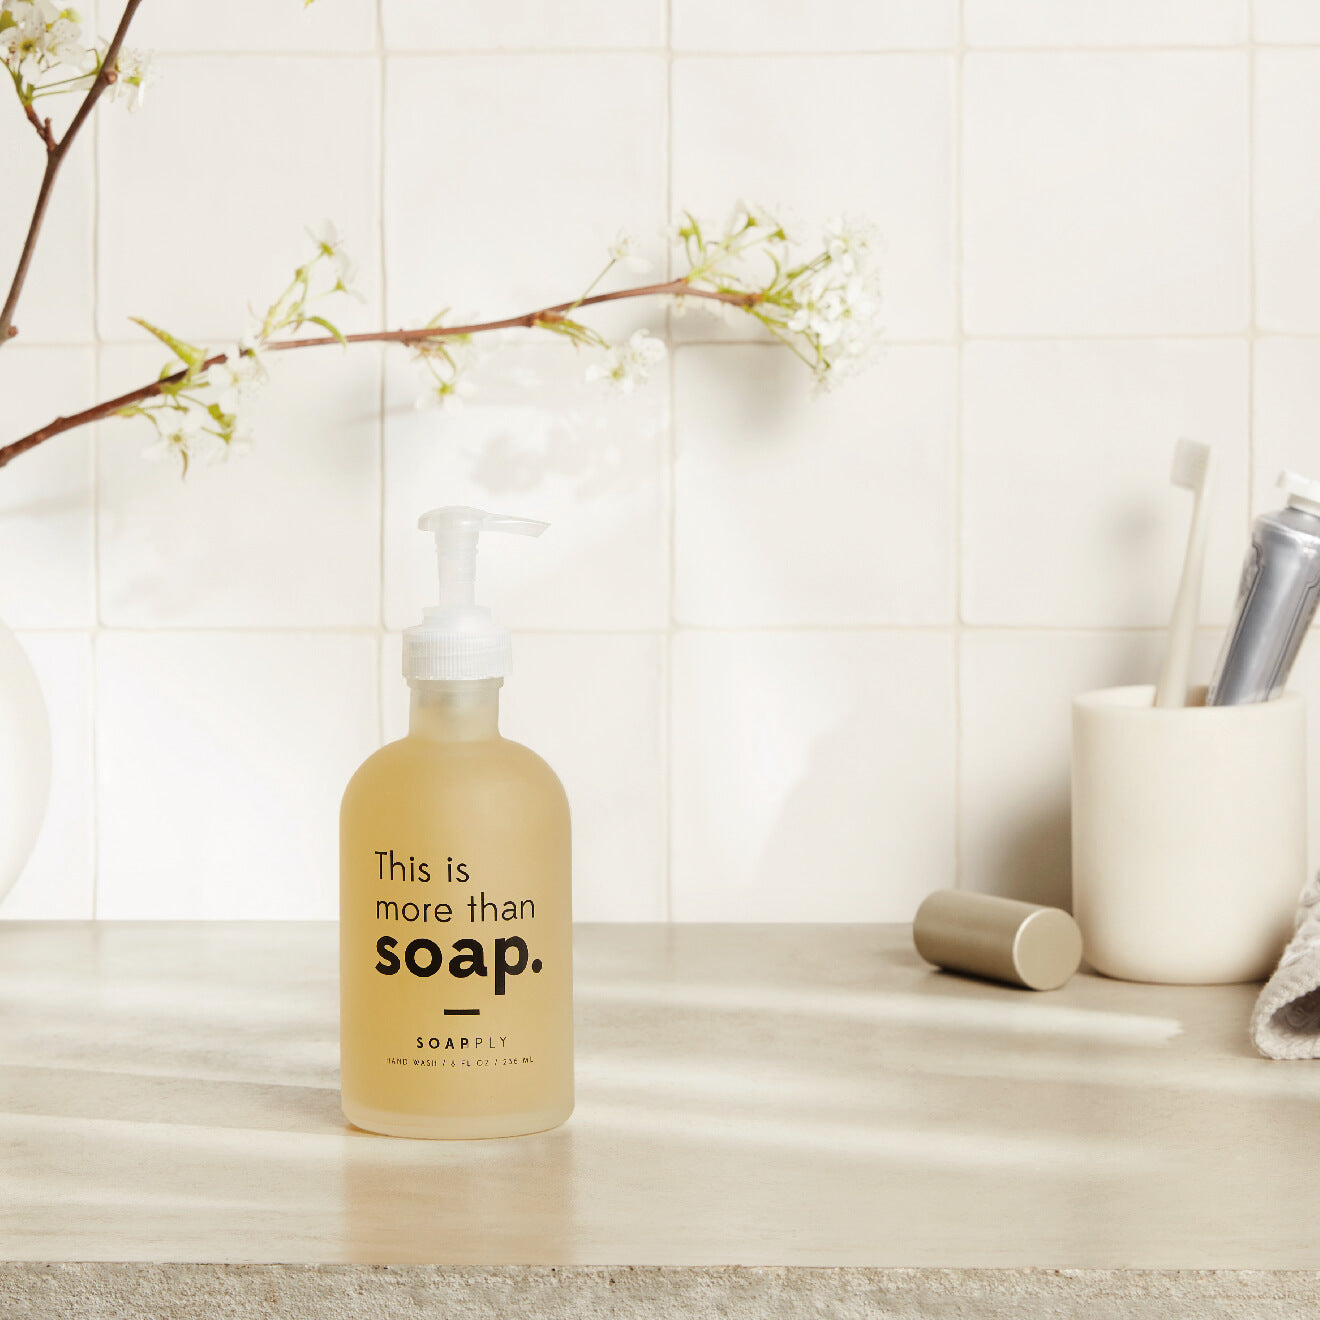 The best soap you’ve ever washed your hands with.